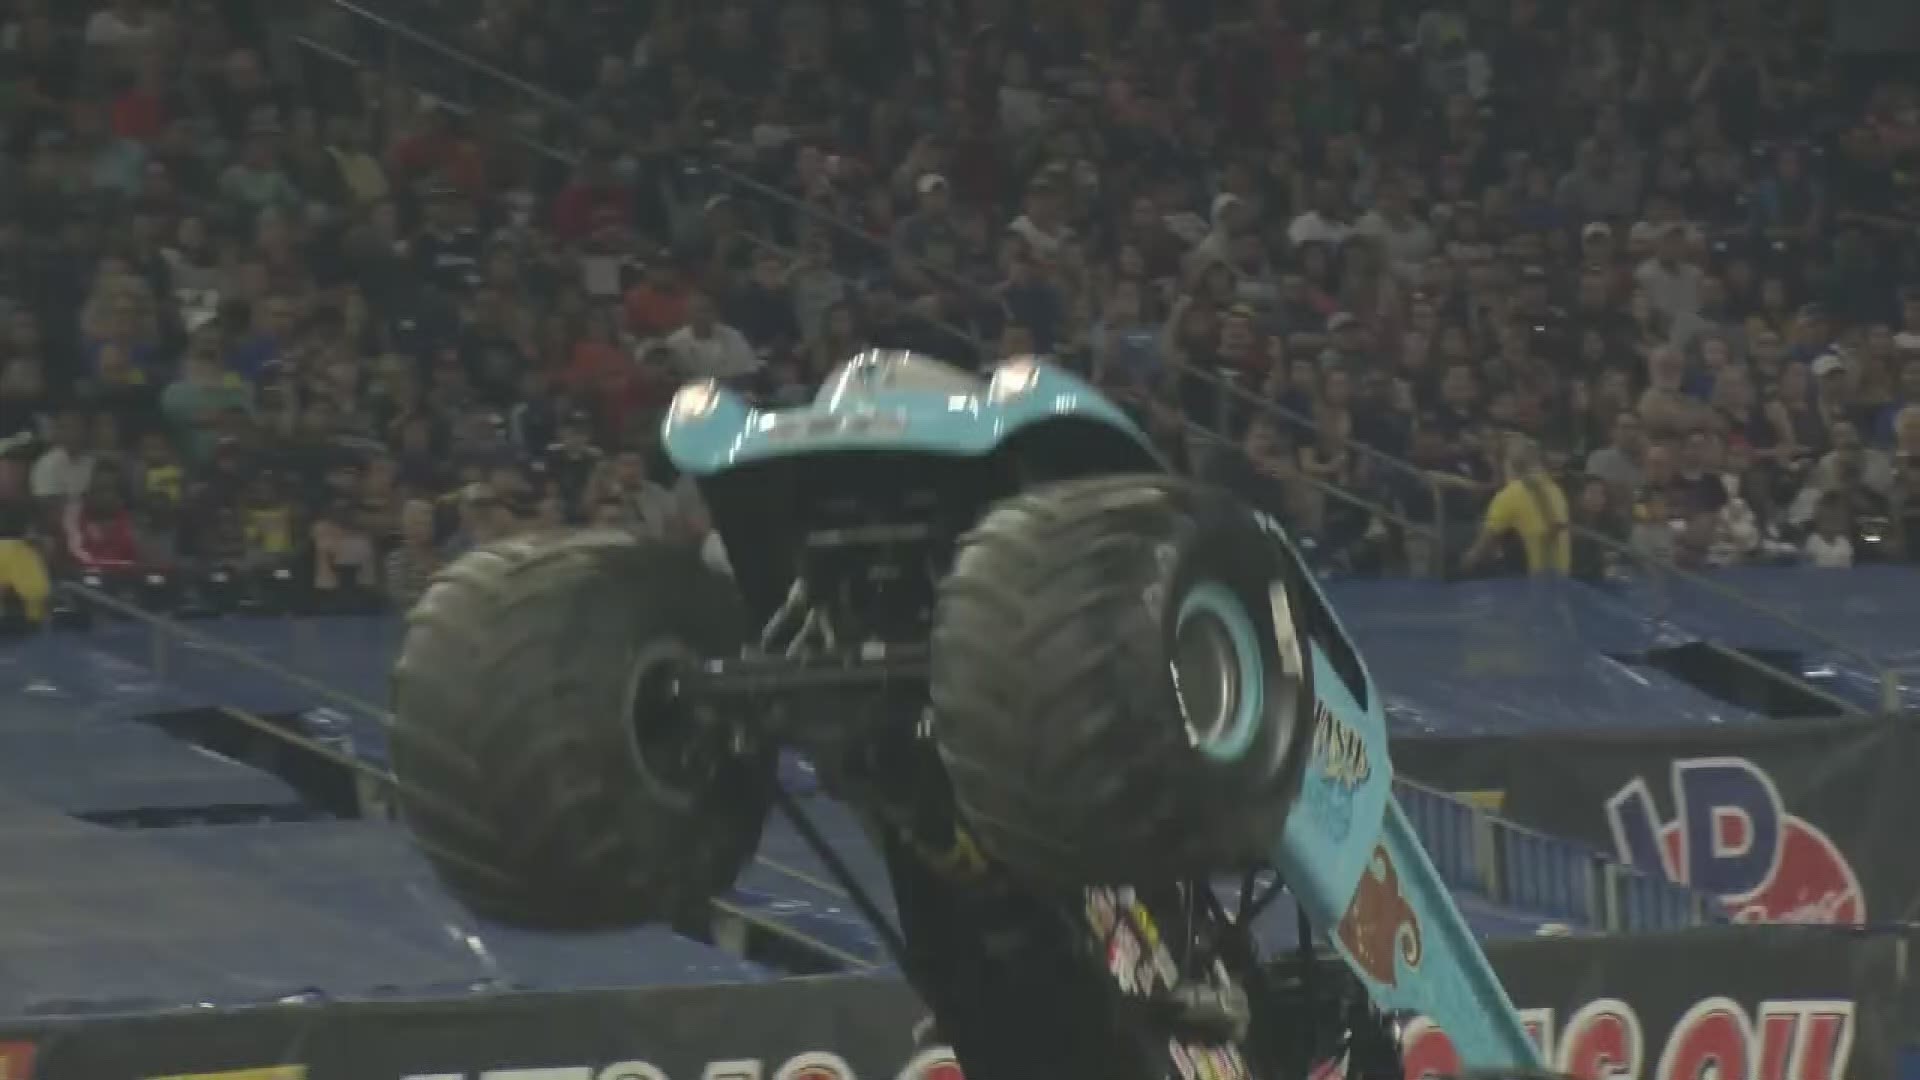 See Brianna when Monster Jam returns to Petco Park on February 15.